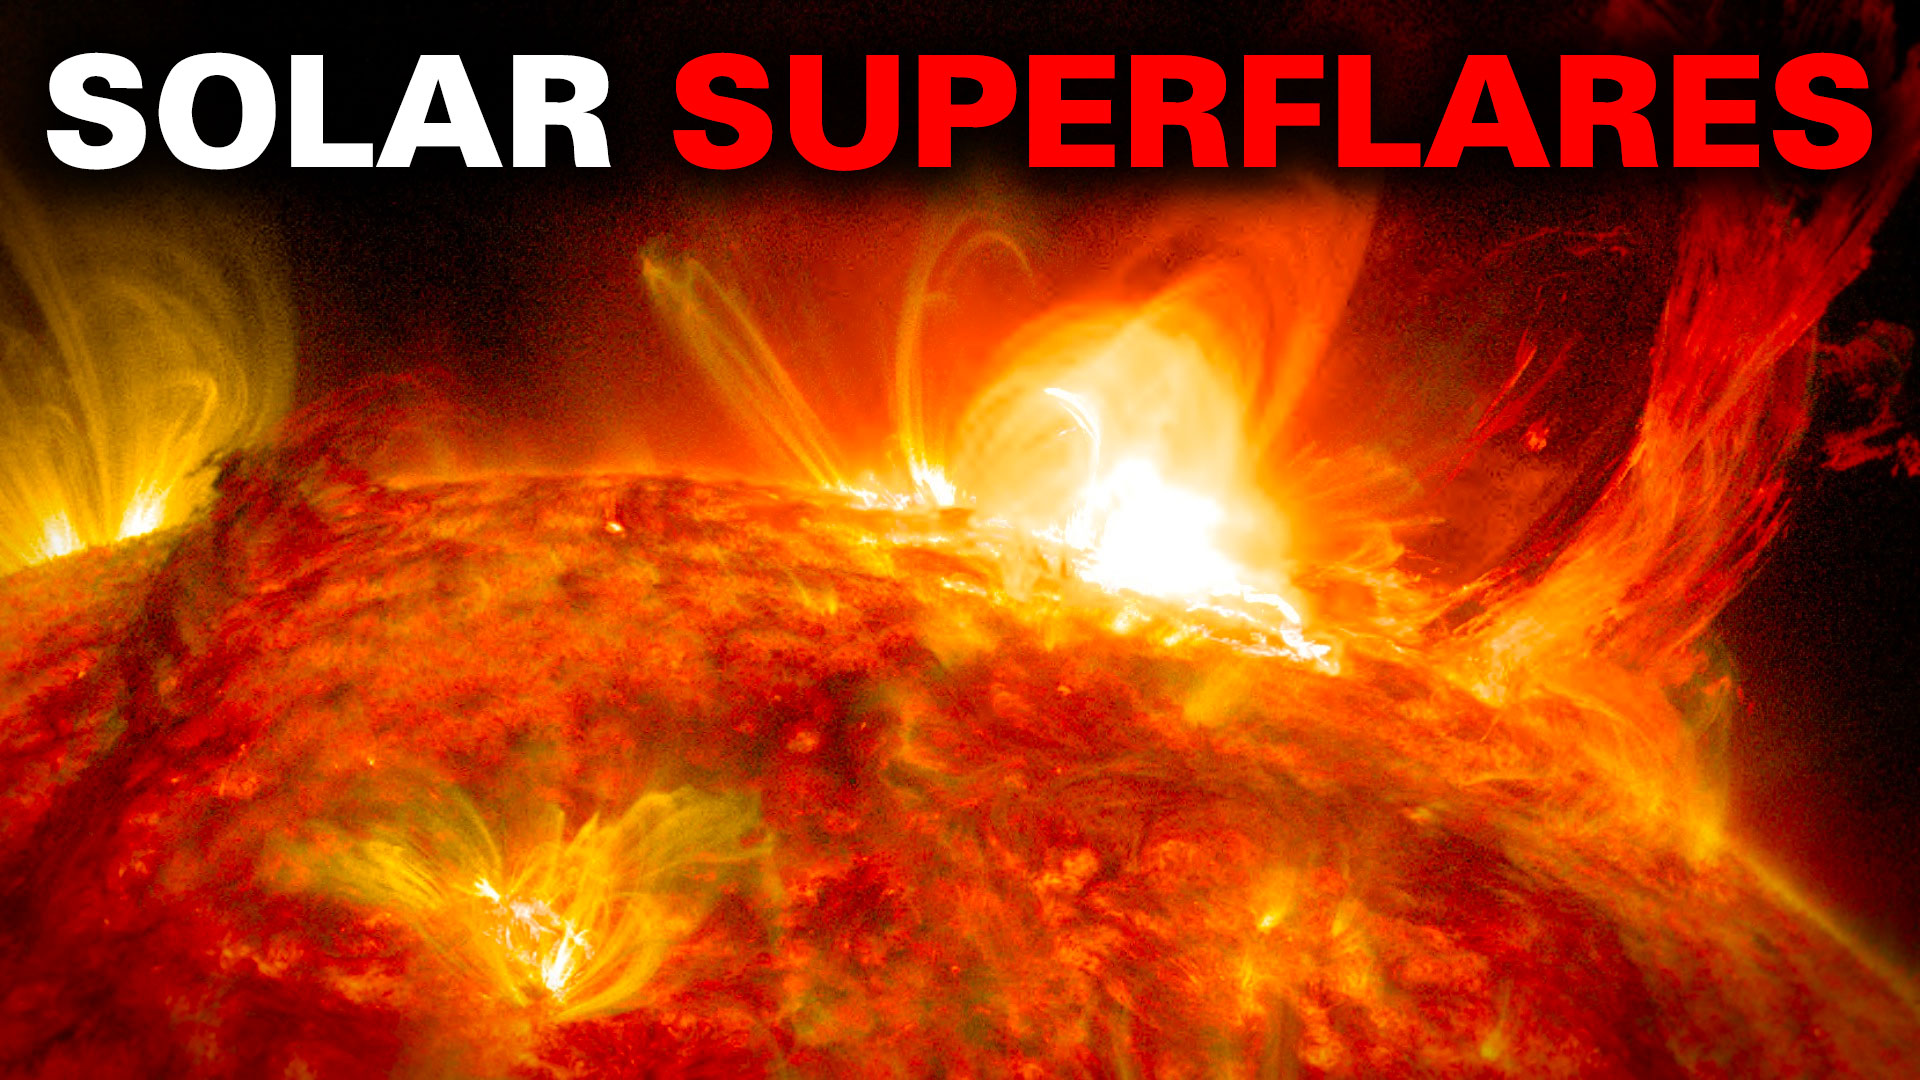 Solar superflares hit Earth multiple times